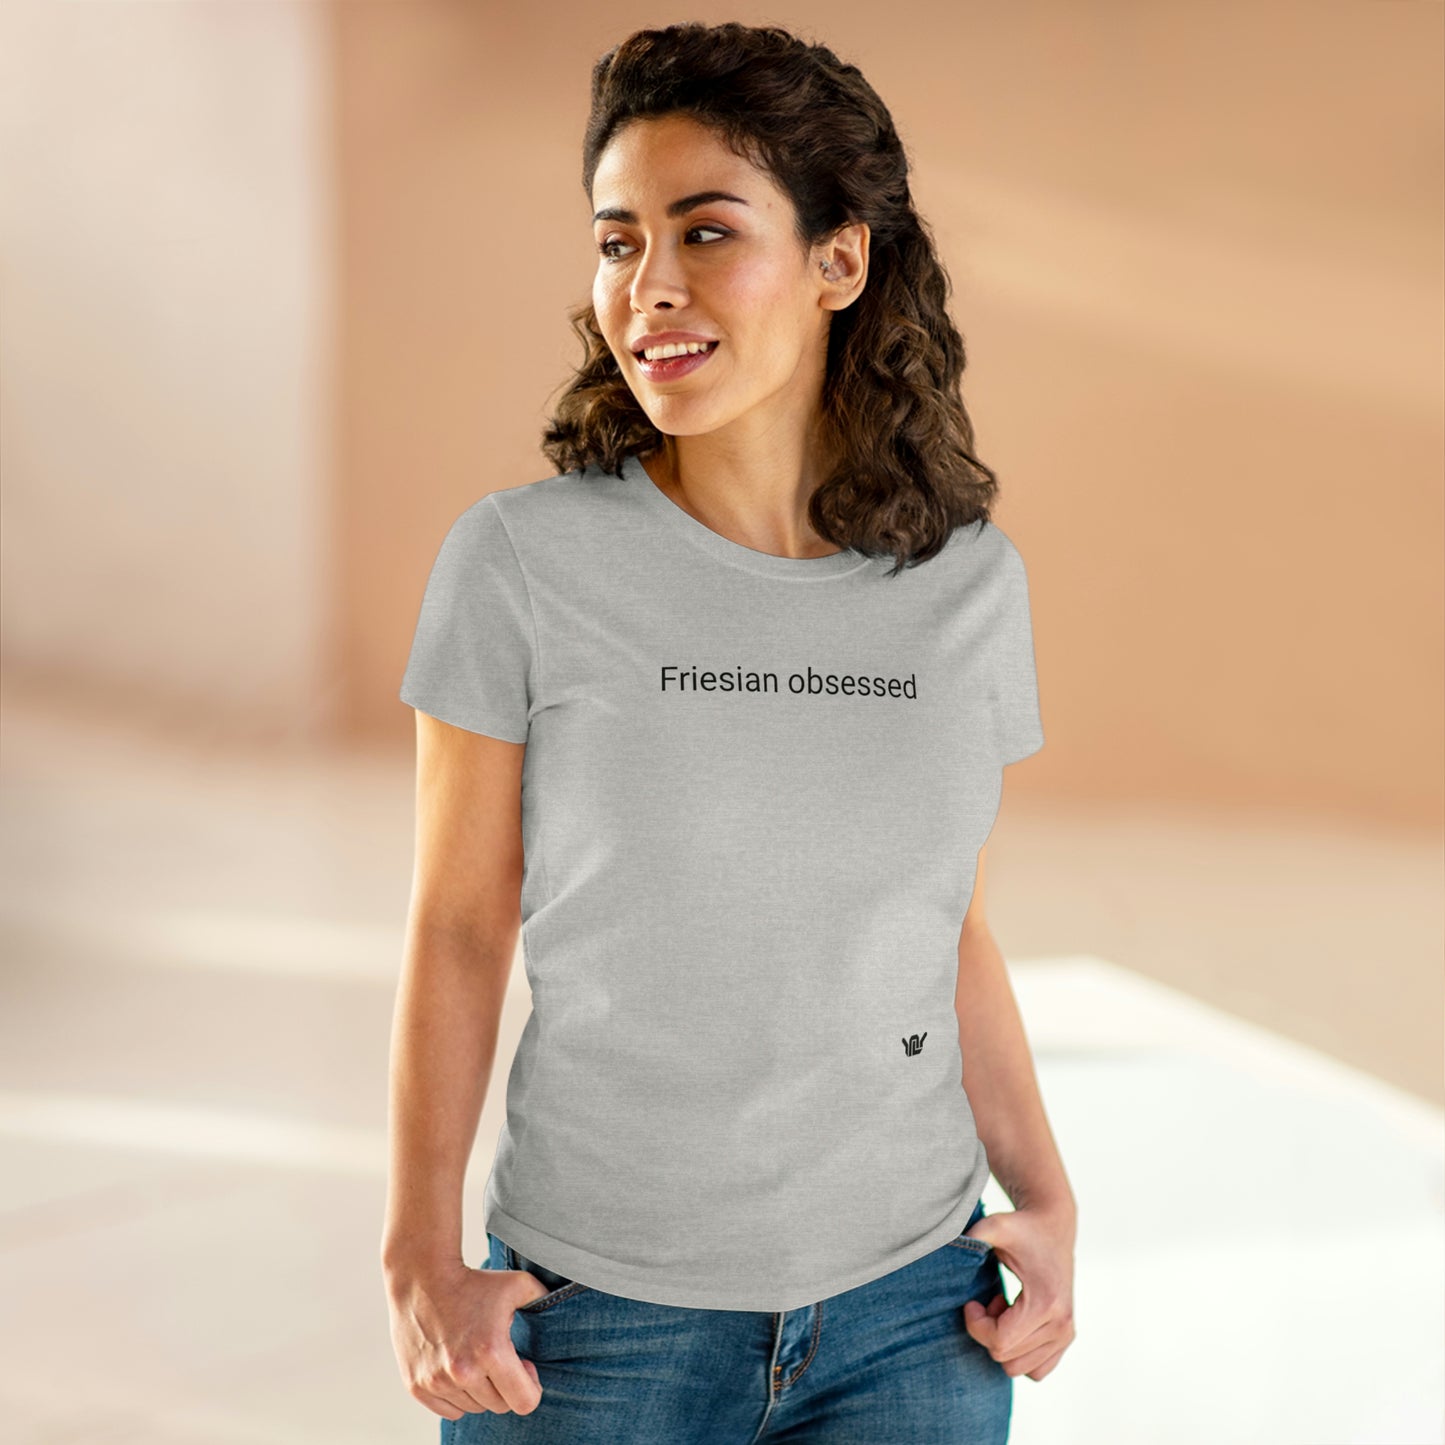 Friesian obsessed woman's t-shirt